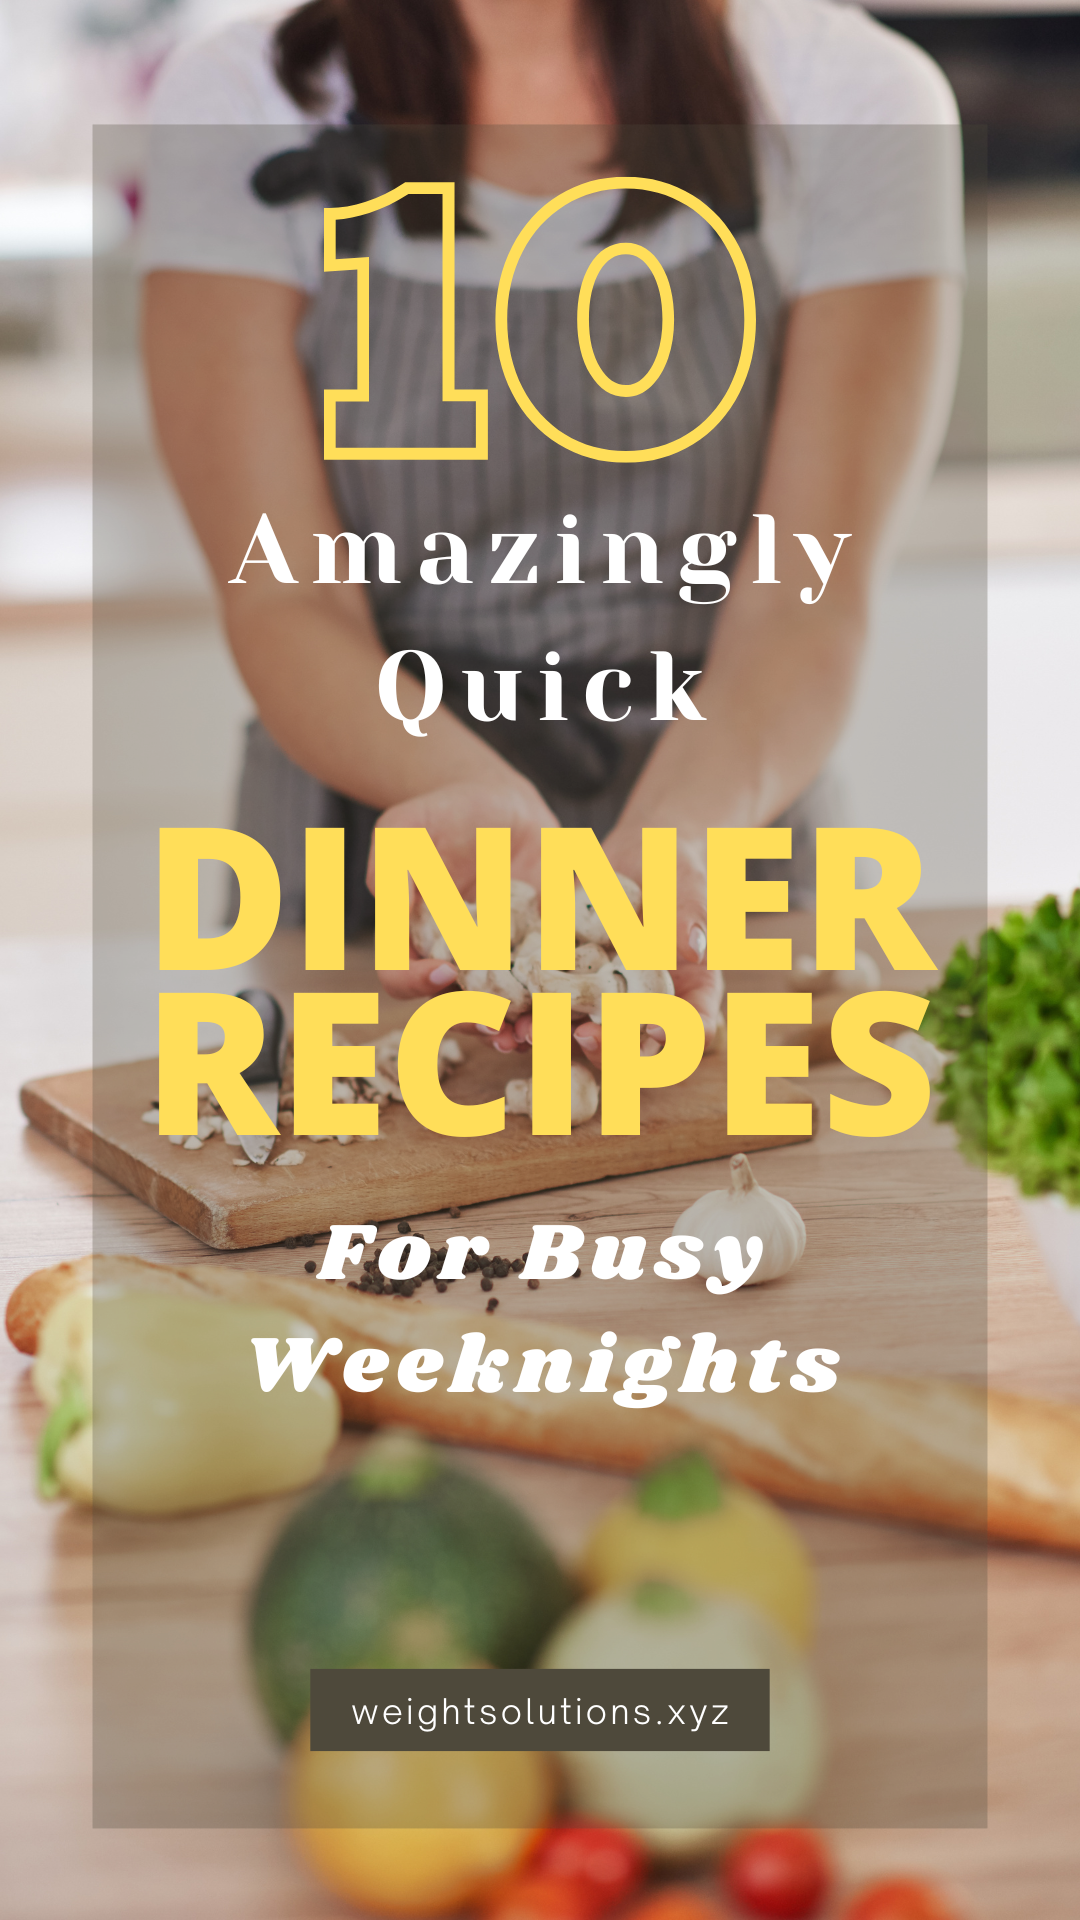 Easy Dinner Recipes for Busy Weeknights